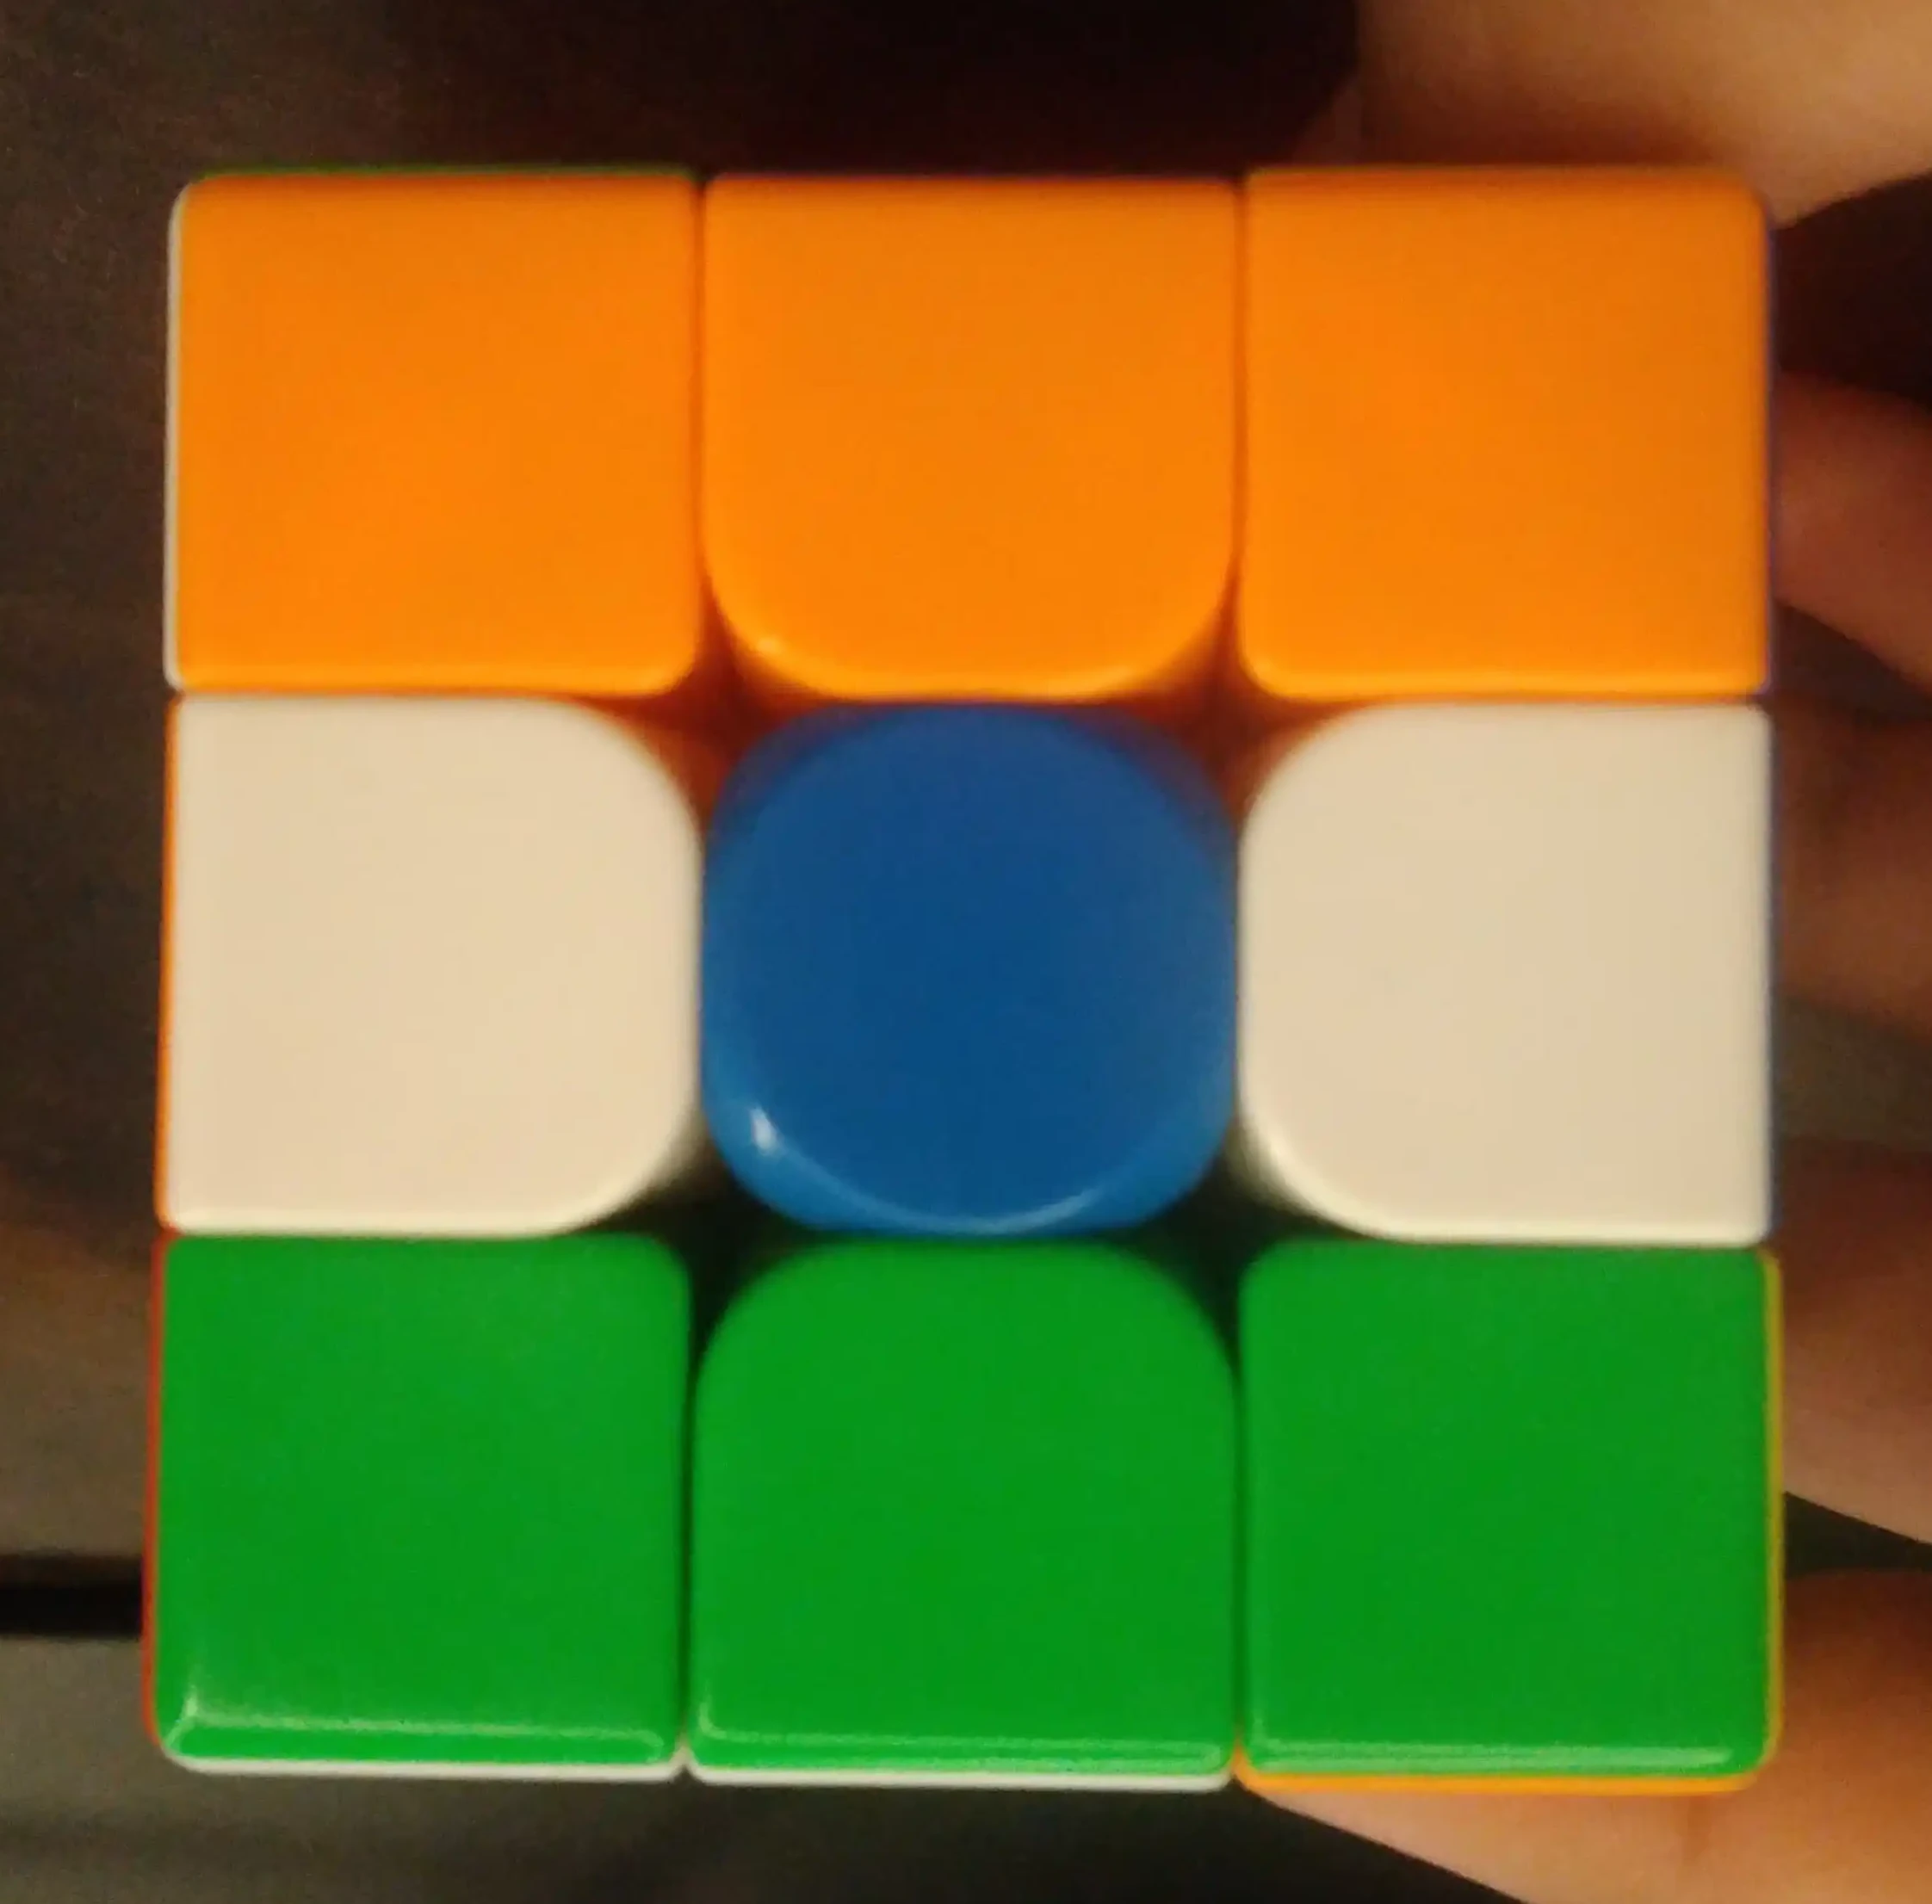 Indian flag pattern on a 3x3 cube